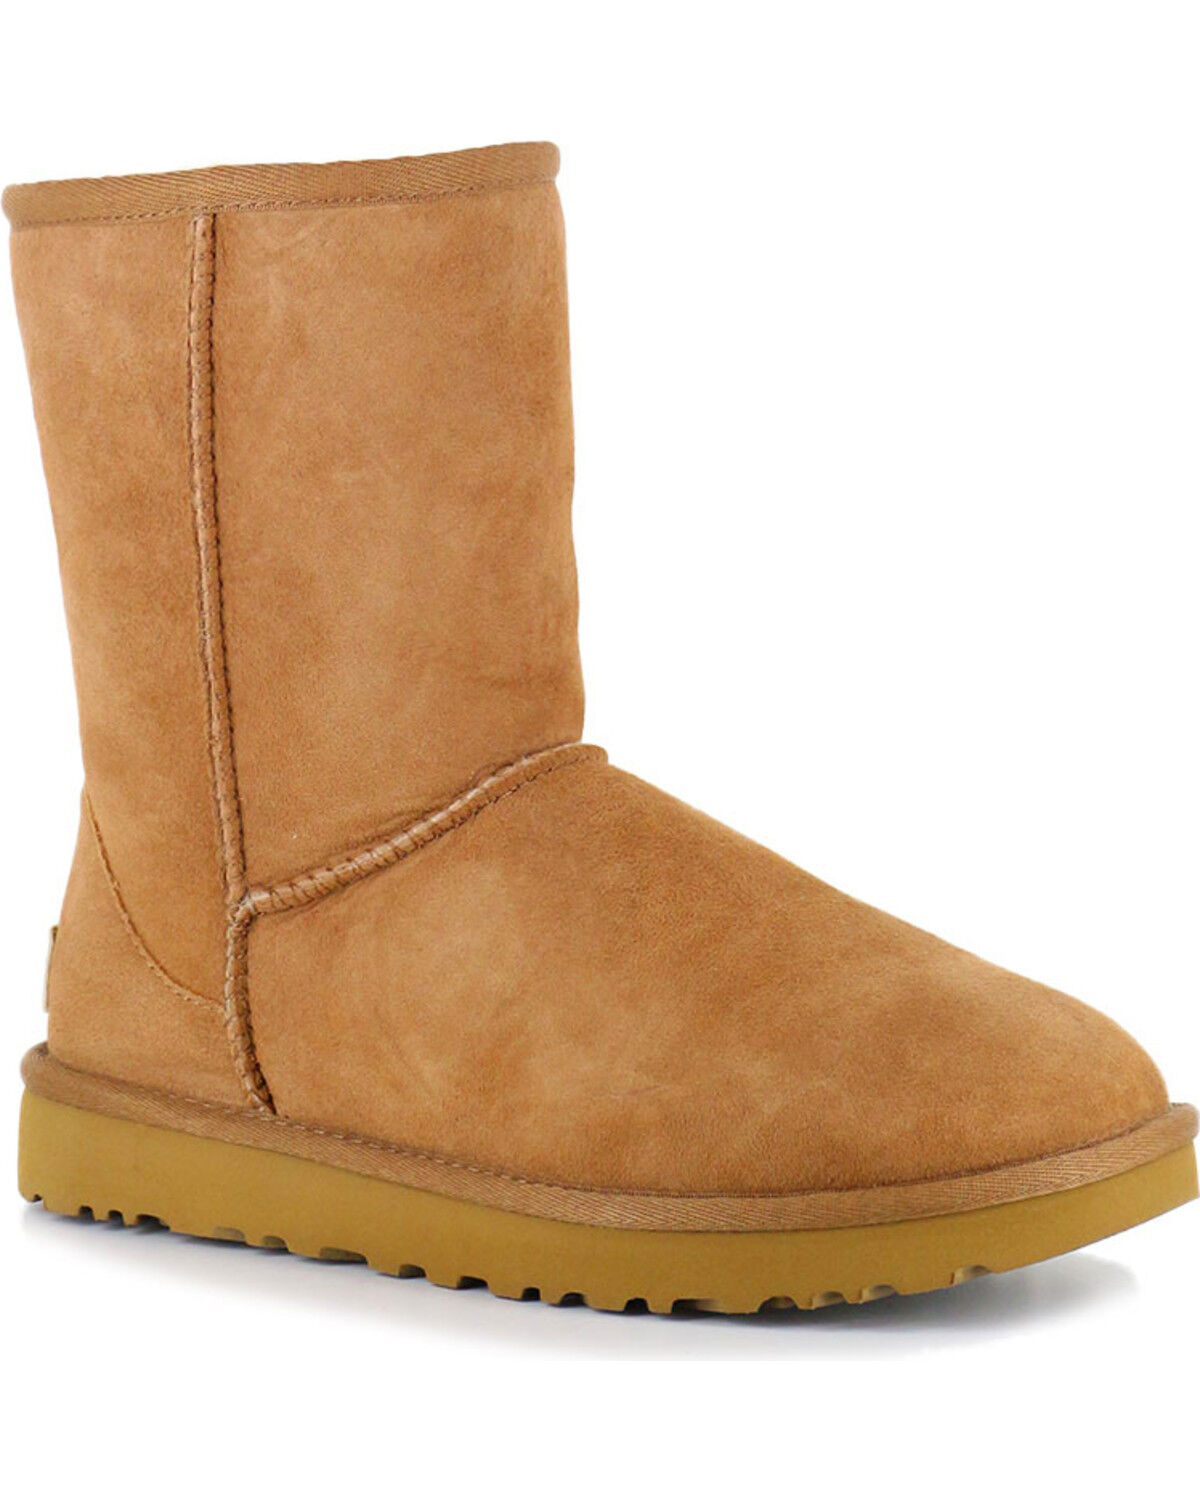 where to buy uggs boots near me